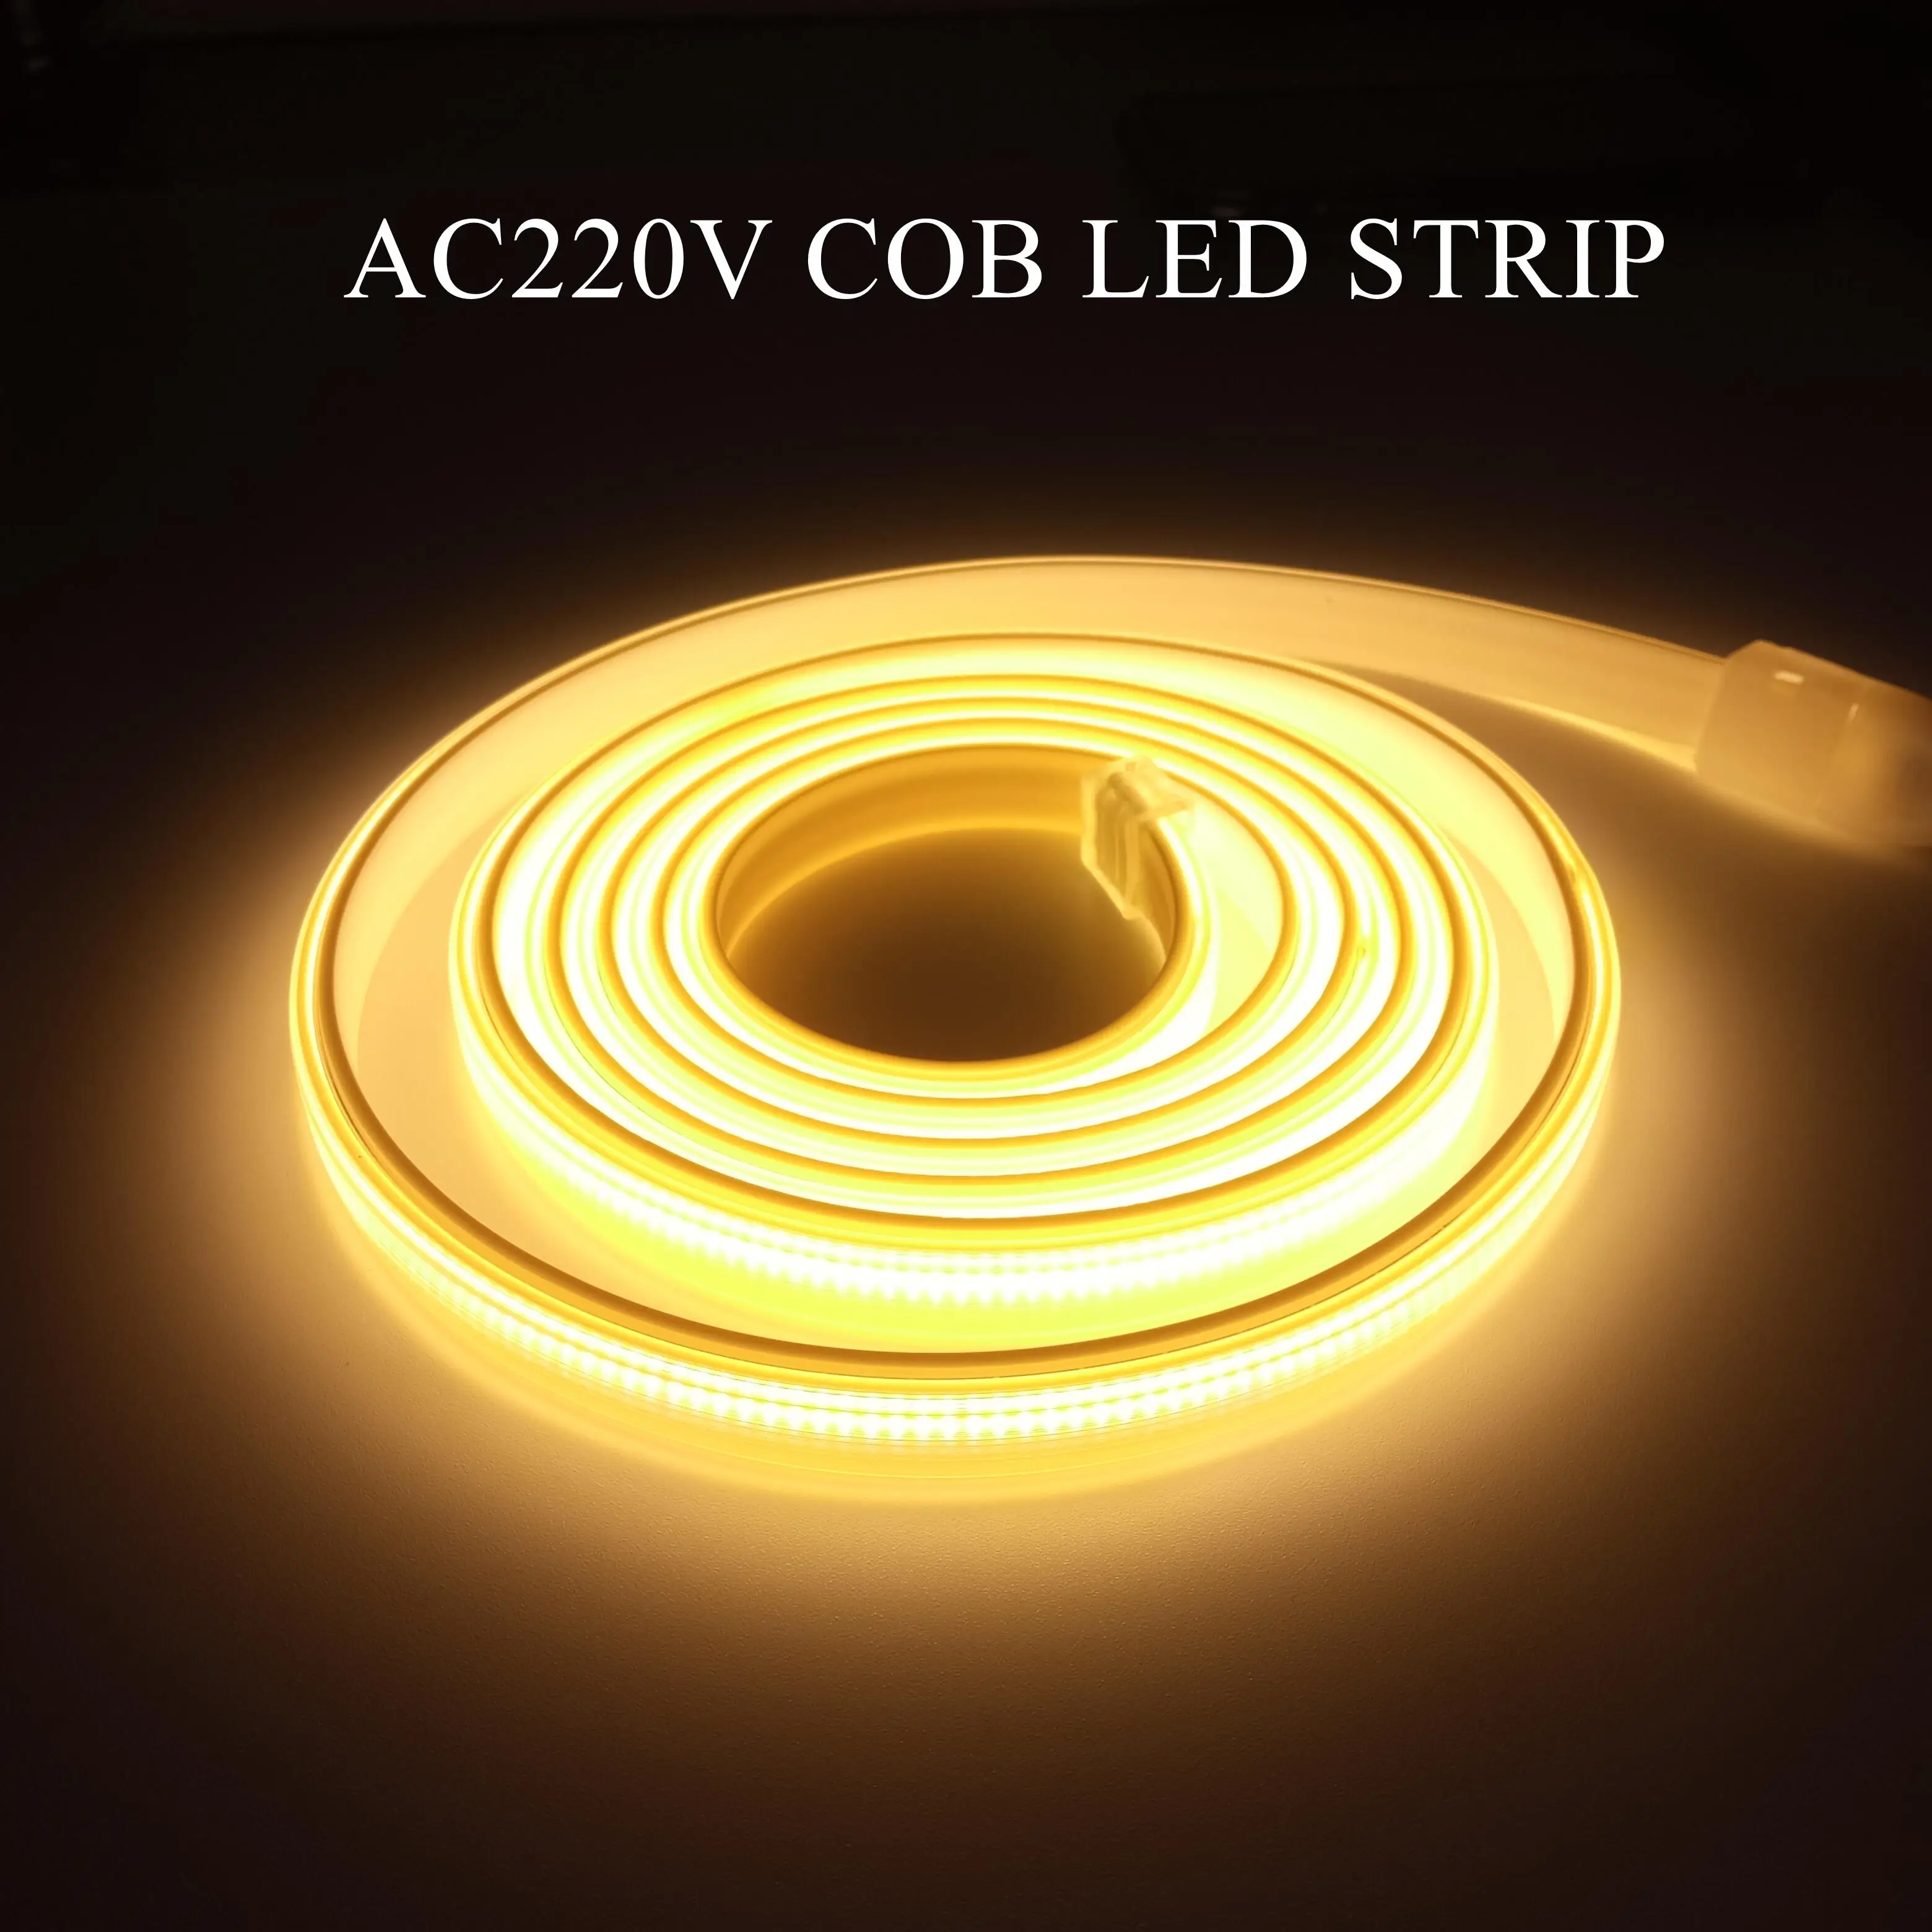 220V COB Led Strip lights High Bright led Tape with Plug Flexible IP67 Waterproof lamp for Room Kitchen decor Outdoor Lighting